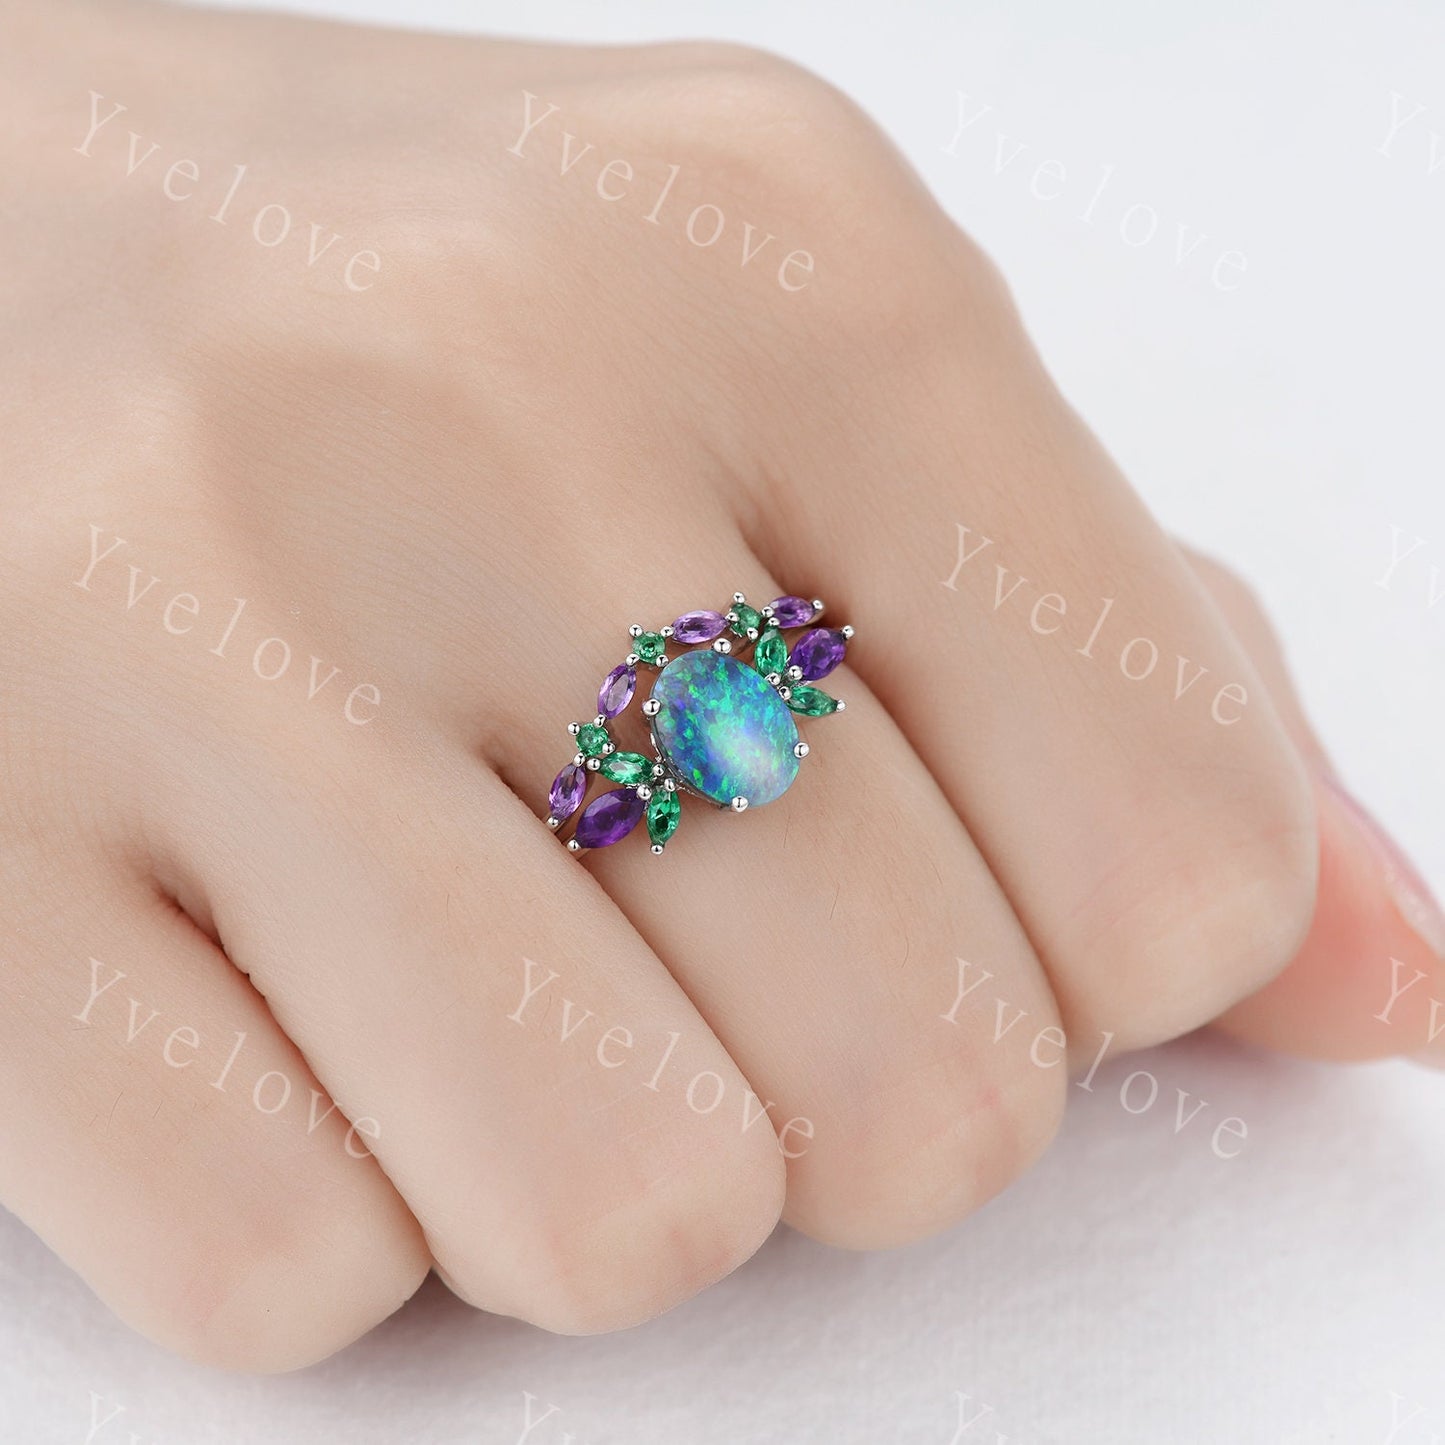 Natural Blue Opal Wedding Ring Set Oval Opal Engagement Ring White Gold Wedding Ring Emerald Amethyst  Promise Jewelry Anniversary Gift